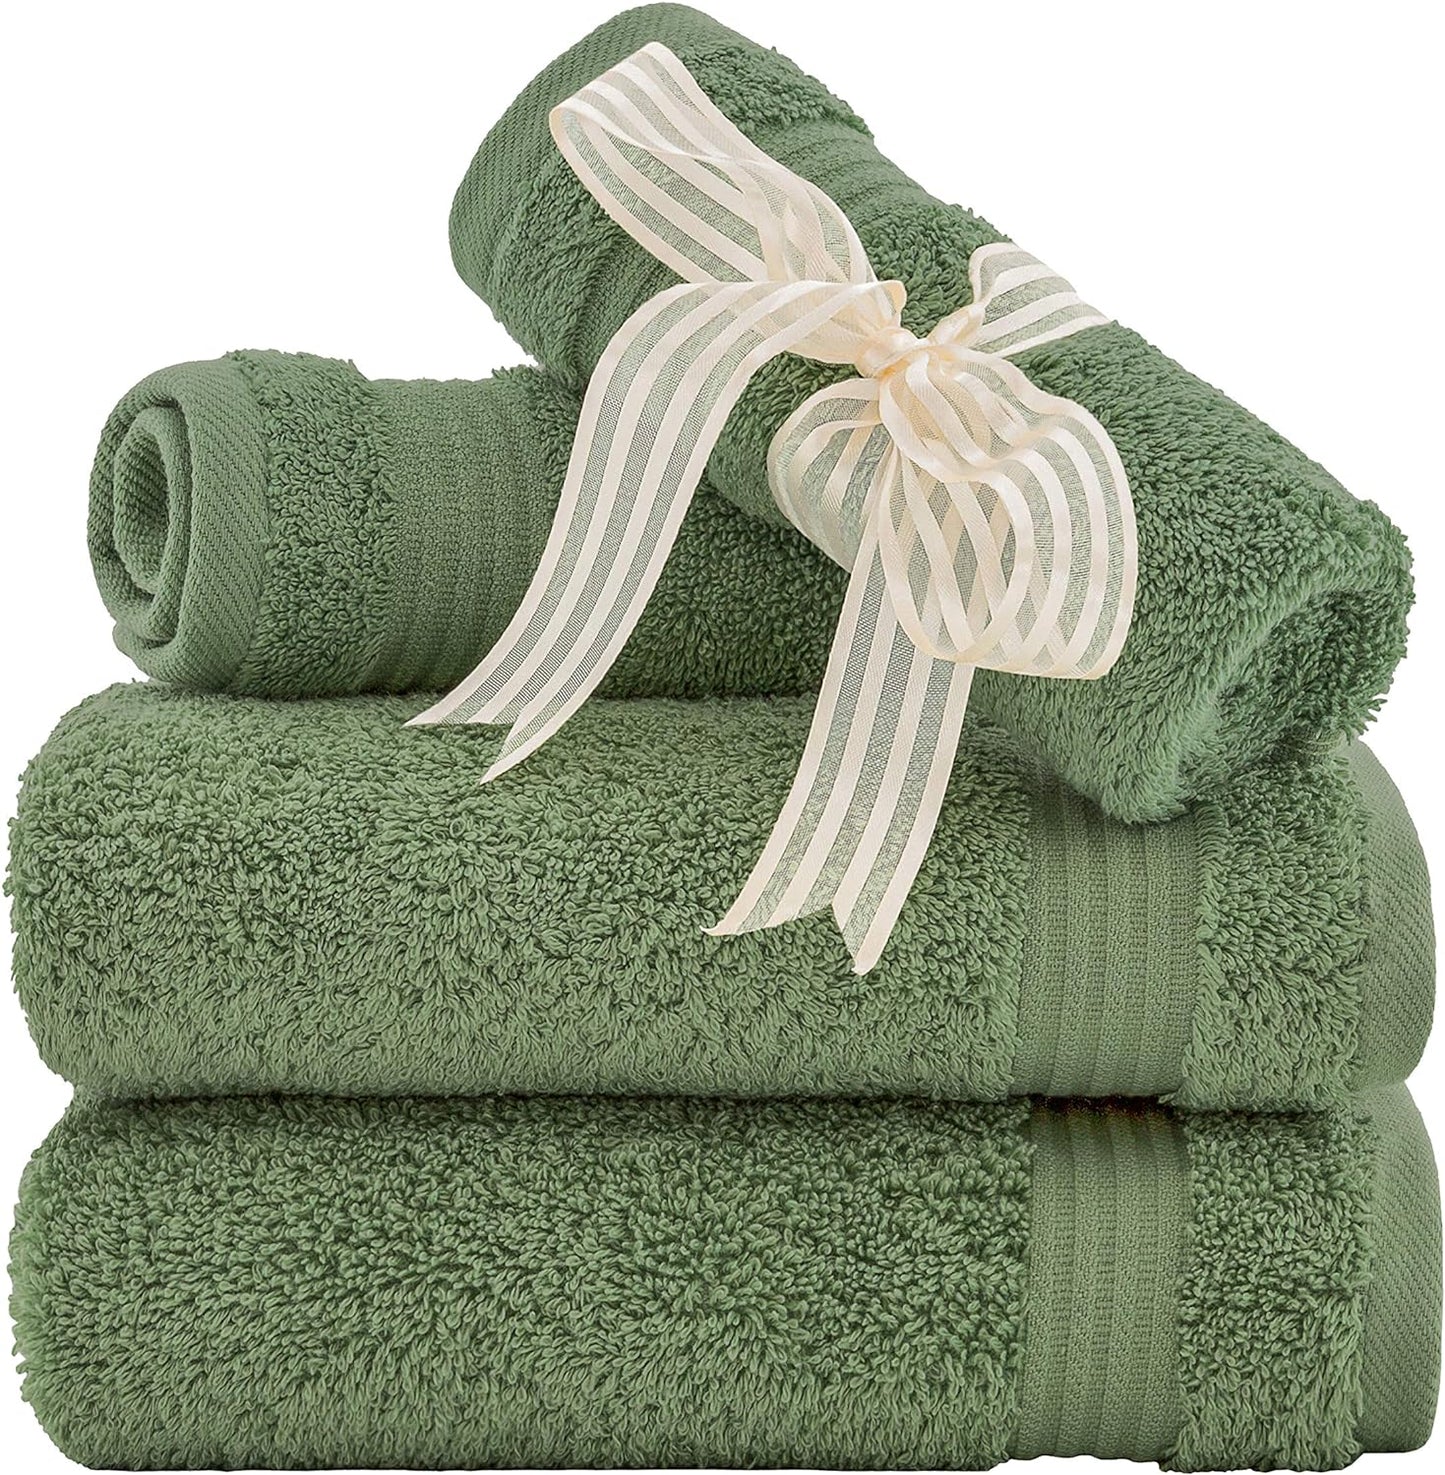 Bath Towels for Bathroom, 4 Packed 27 Inch 54 Inch 100% Turkish Cotton Large Bath Towels, Soft Absorbent Towel Sets, Light Grey Bath Towels